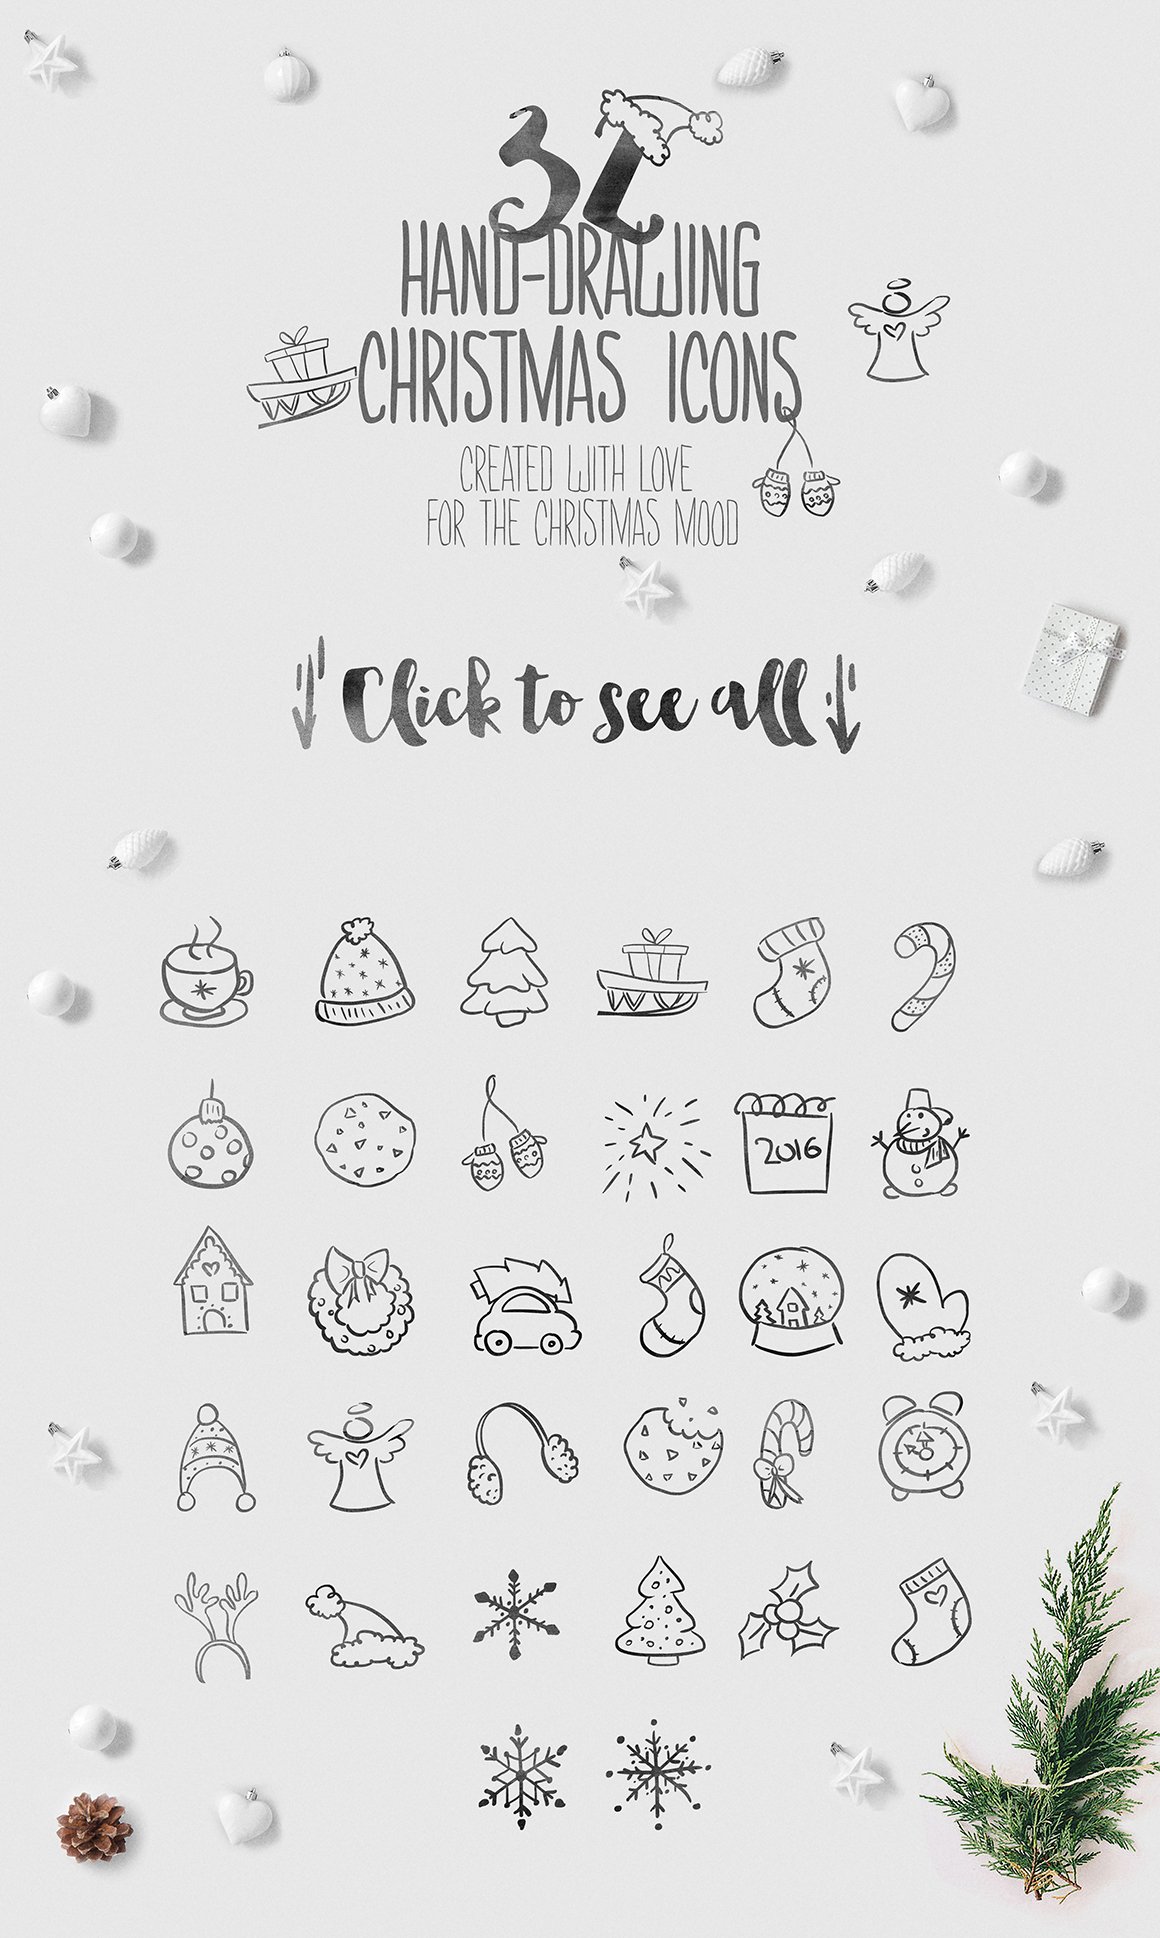 A set of 32 black different hand-drawing christmas icons on a gray background.